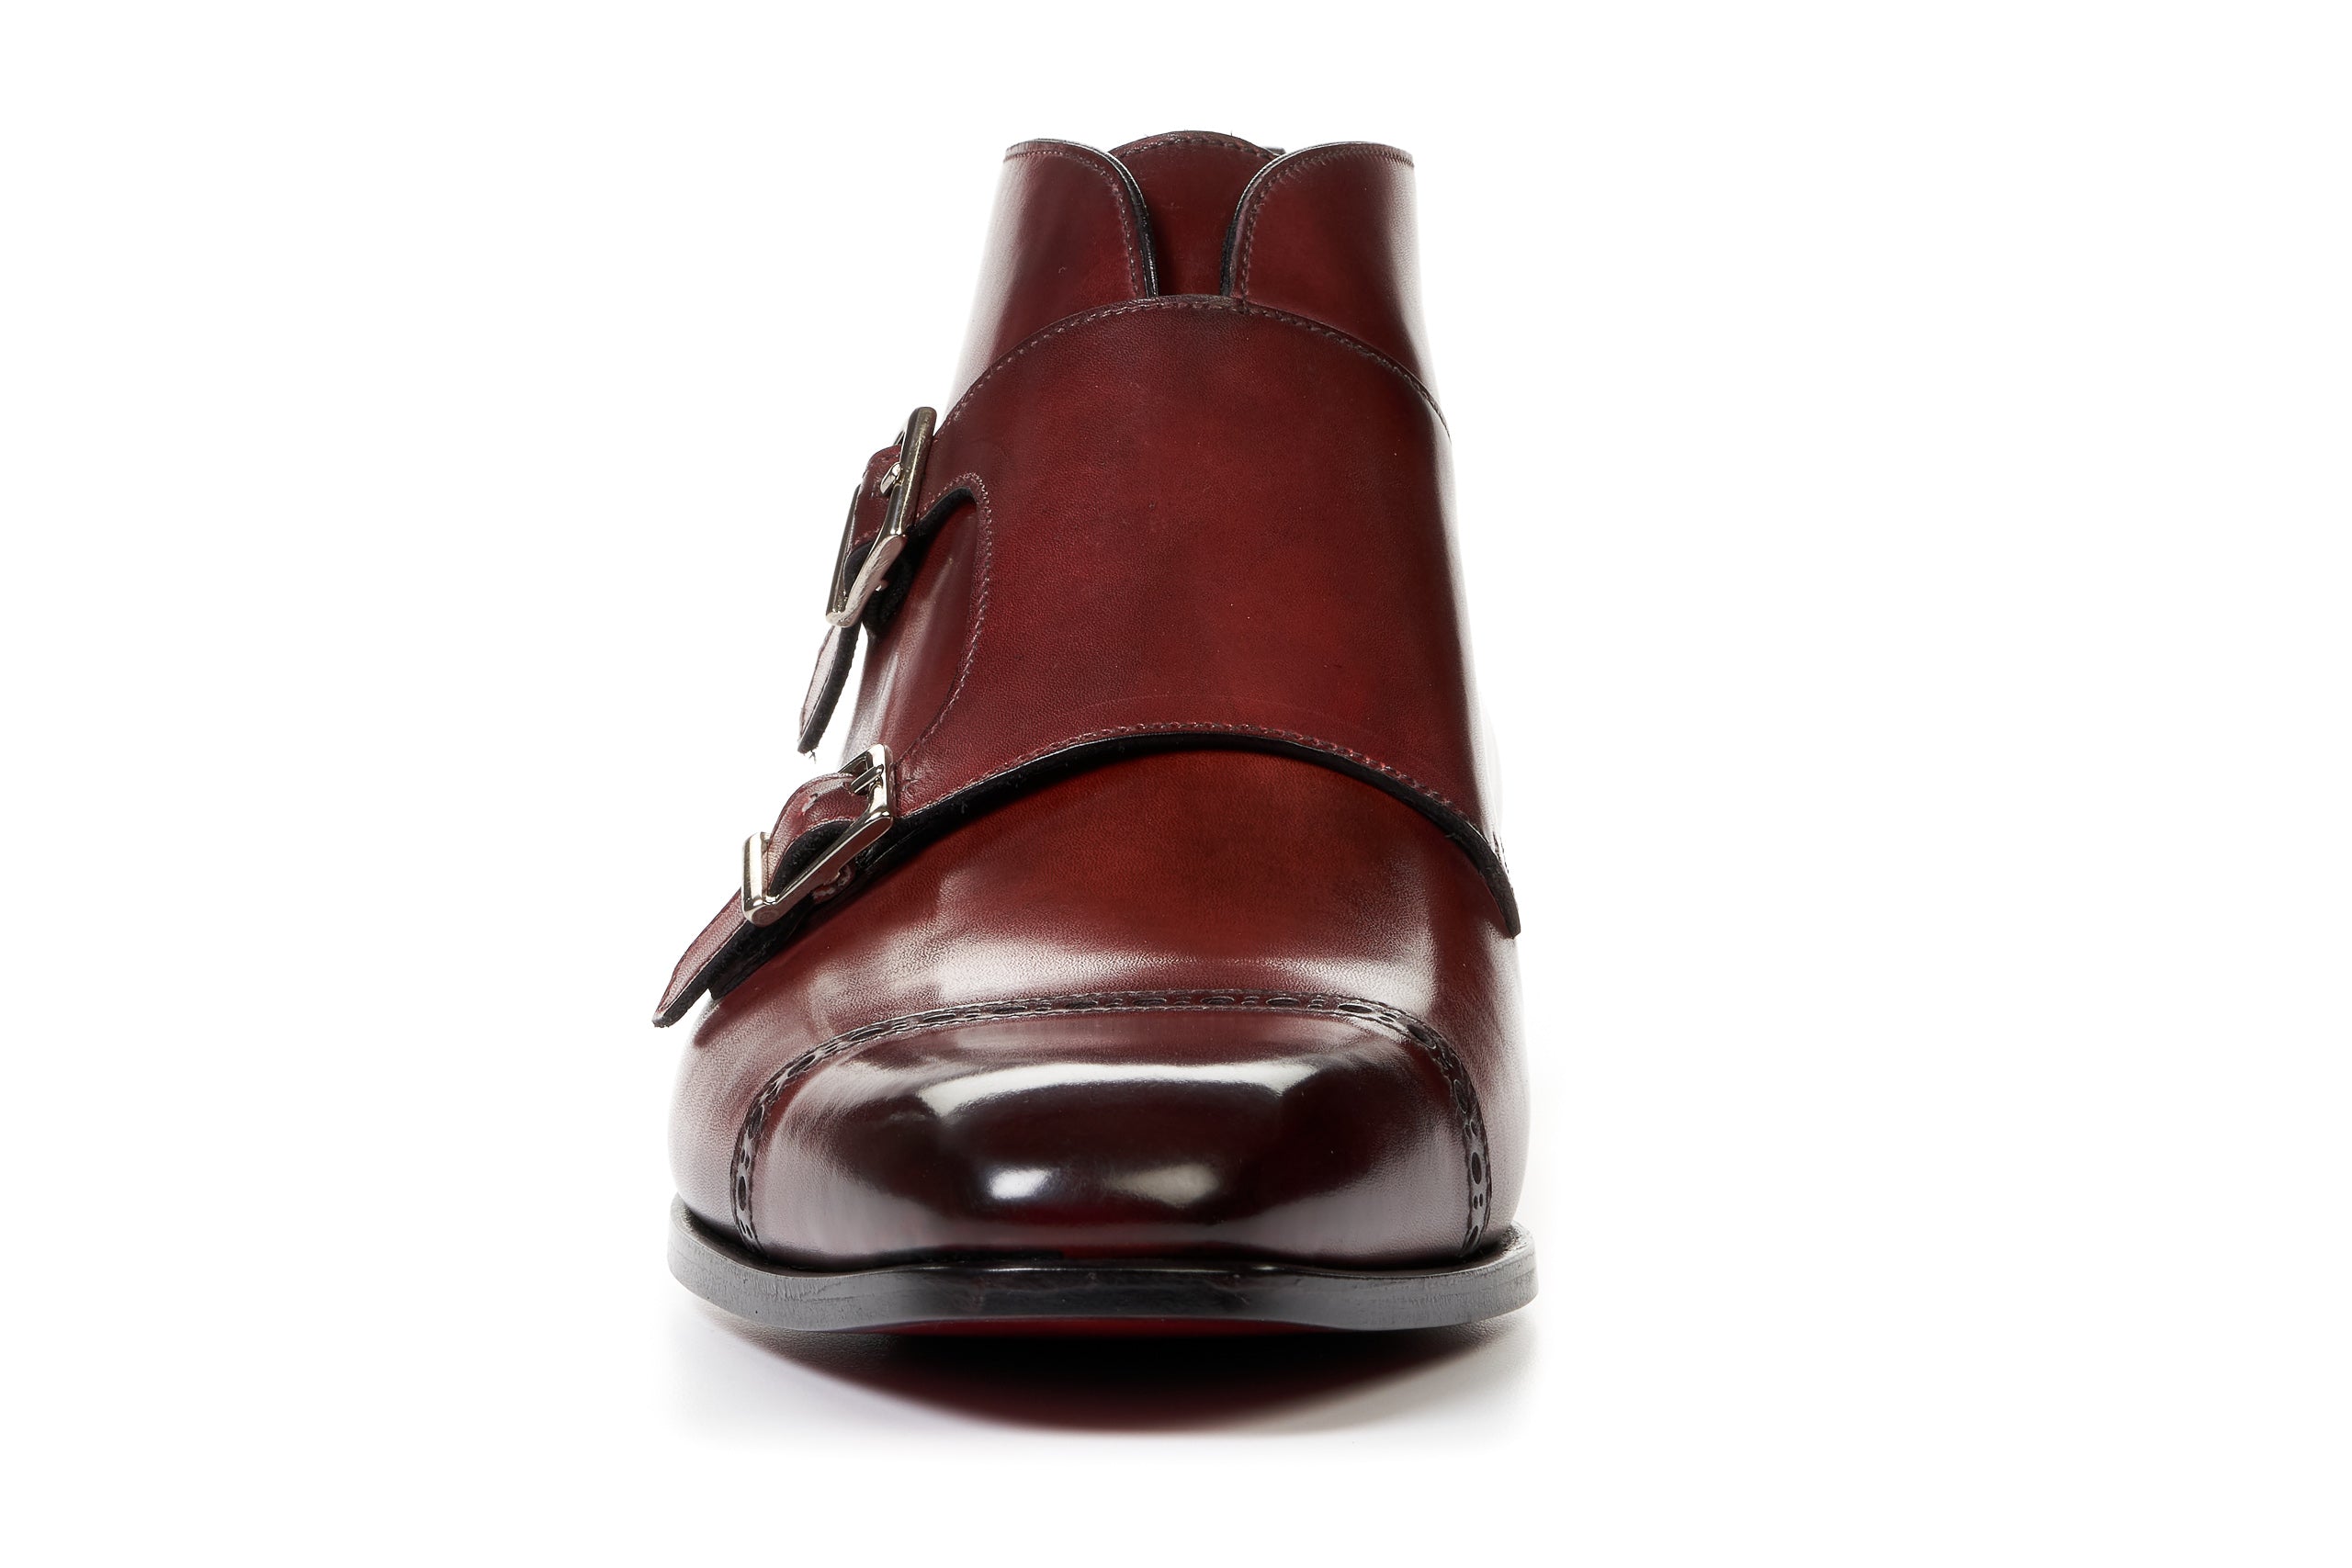 The Heston Double Monk Strap Boot - Oxblood